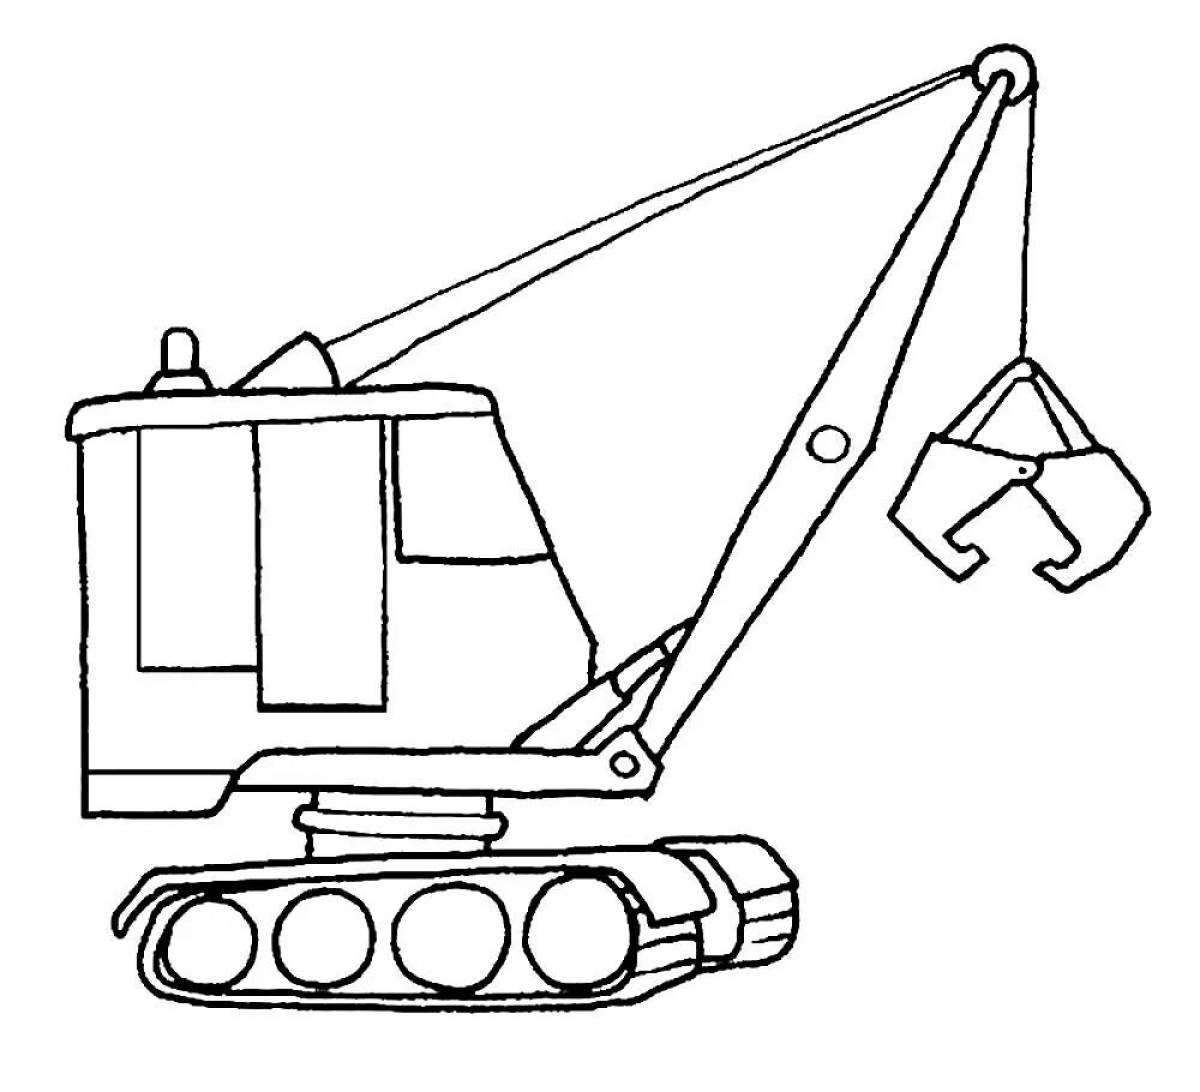 Coloring page incredible construction machinery